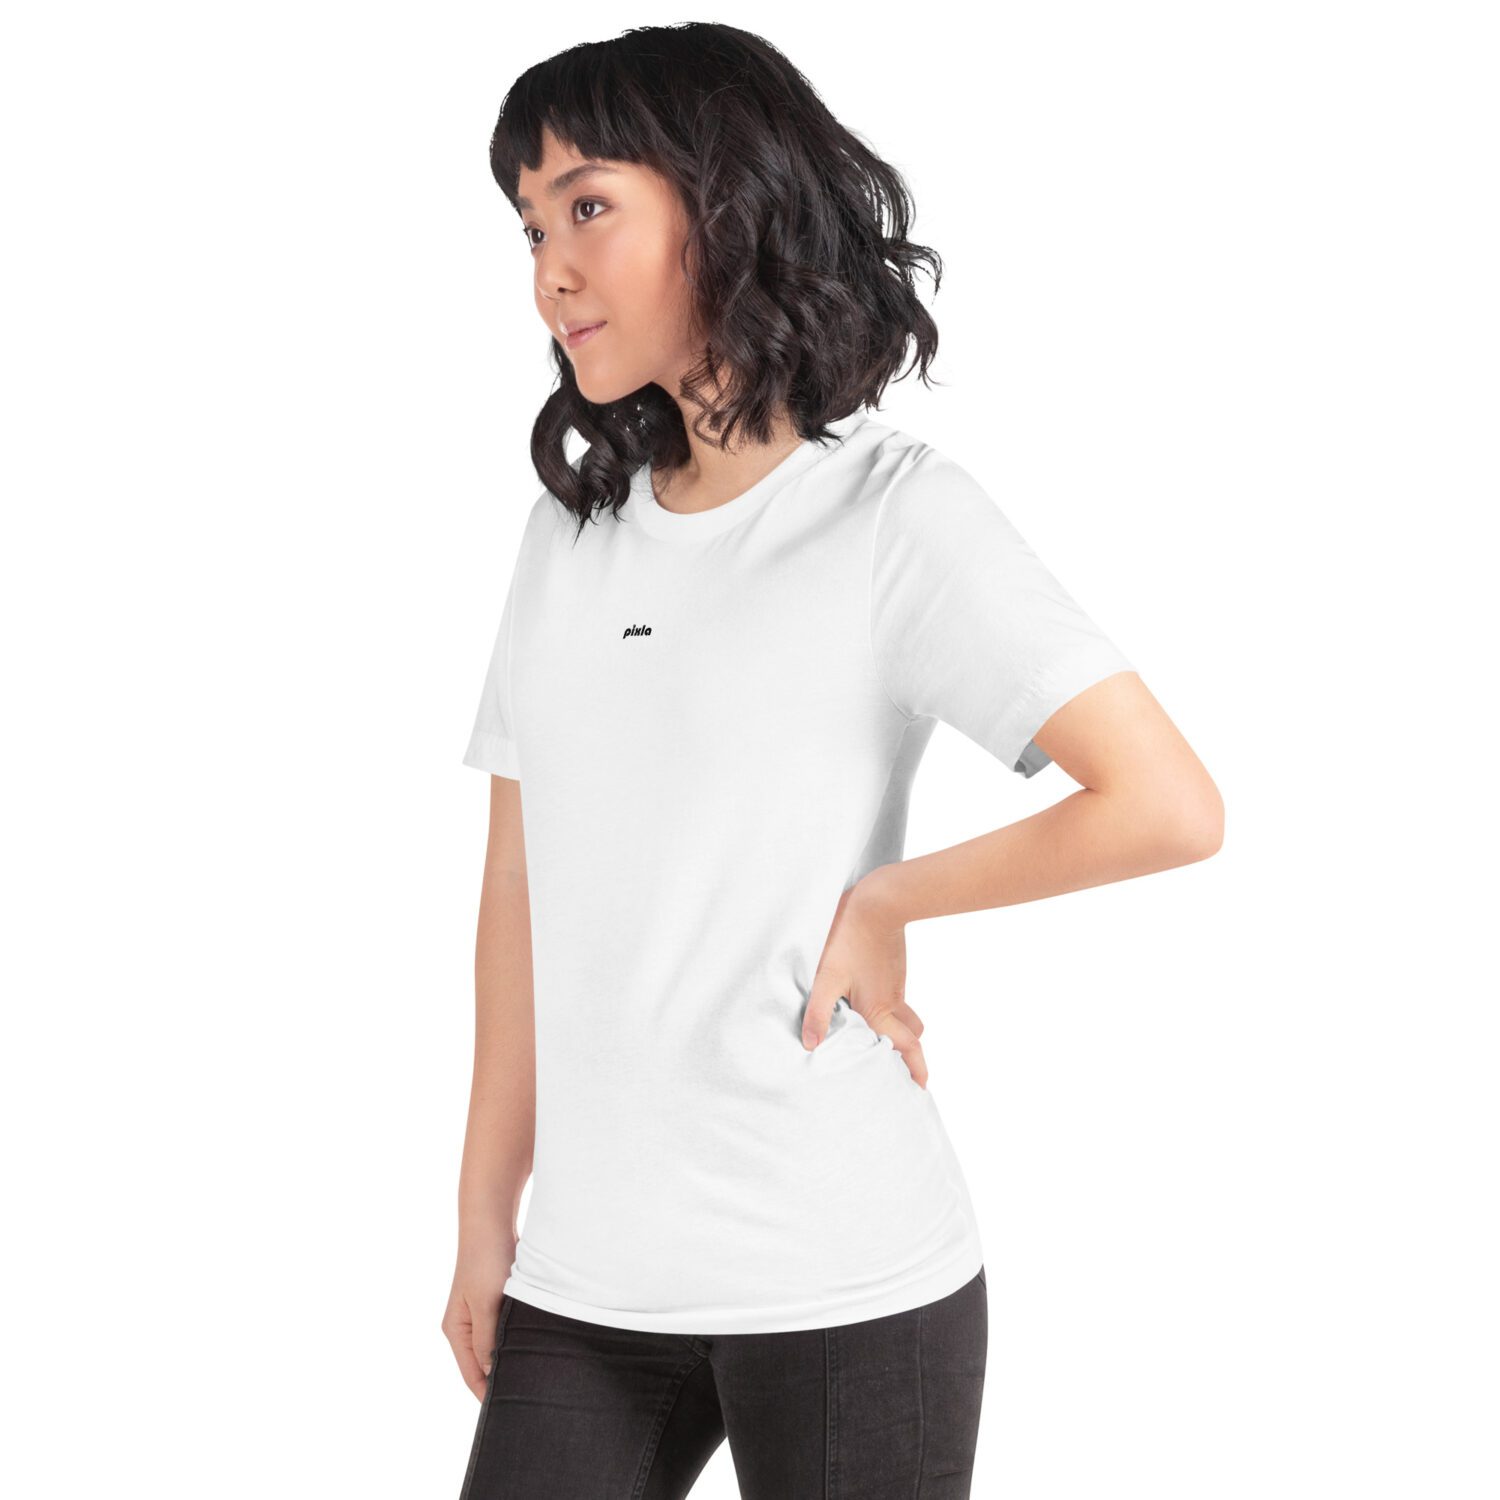 Soft and medium to lightweight white t-shirt with just the right amount of stretch without losing structure. It’s comfortable and flattering and comes with a royal blue print on the front and upper back.